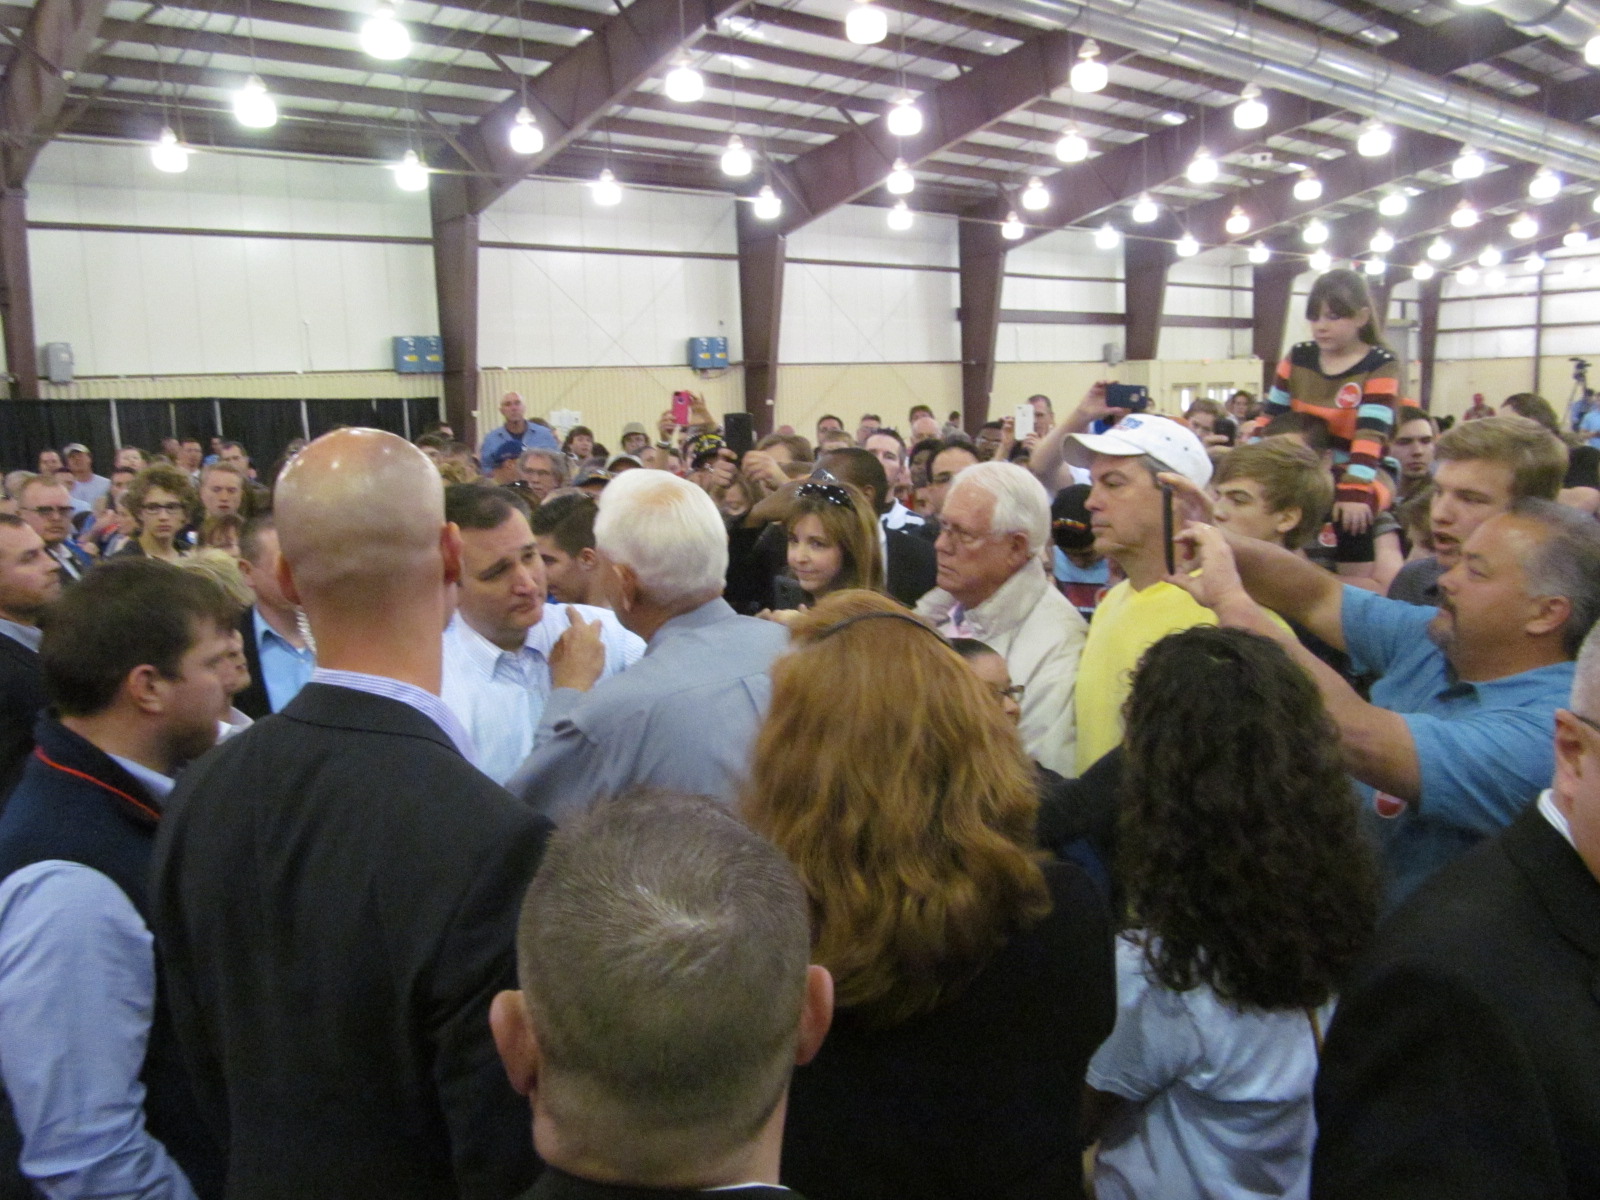 Ted Cruz listens to voter following rally (SX021038.JPG)